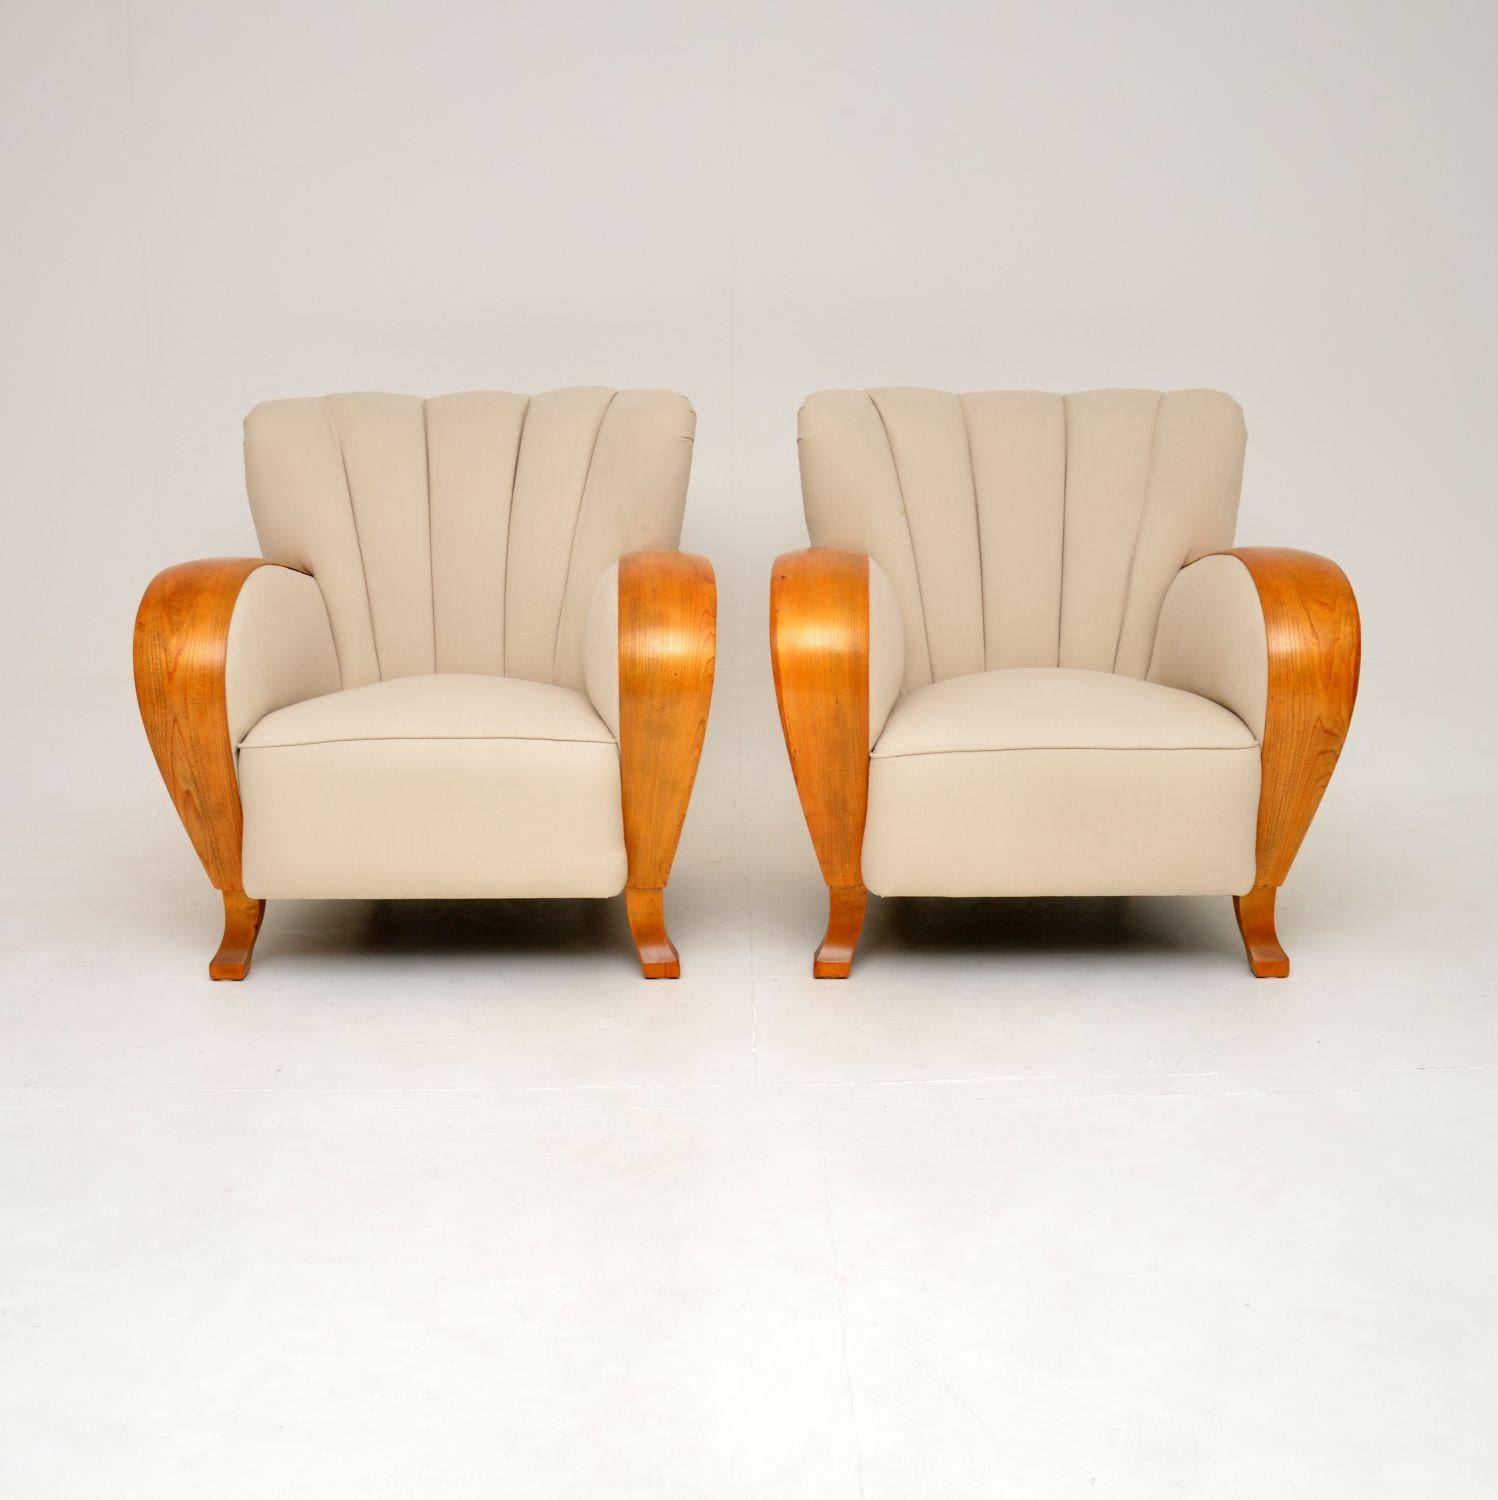 An absolutely stunning & very stylish pair of Art Deco armchairs with elm arms. They were made in Sweden, we have recently imported them and they date from the 1920-30’s.

They are of generous proportions and are of outstanding quality. The backs